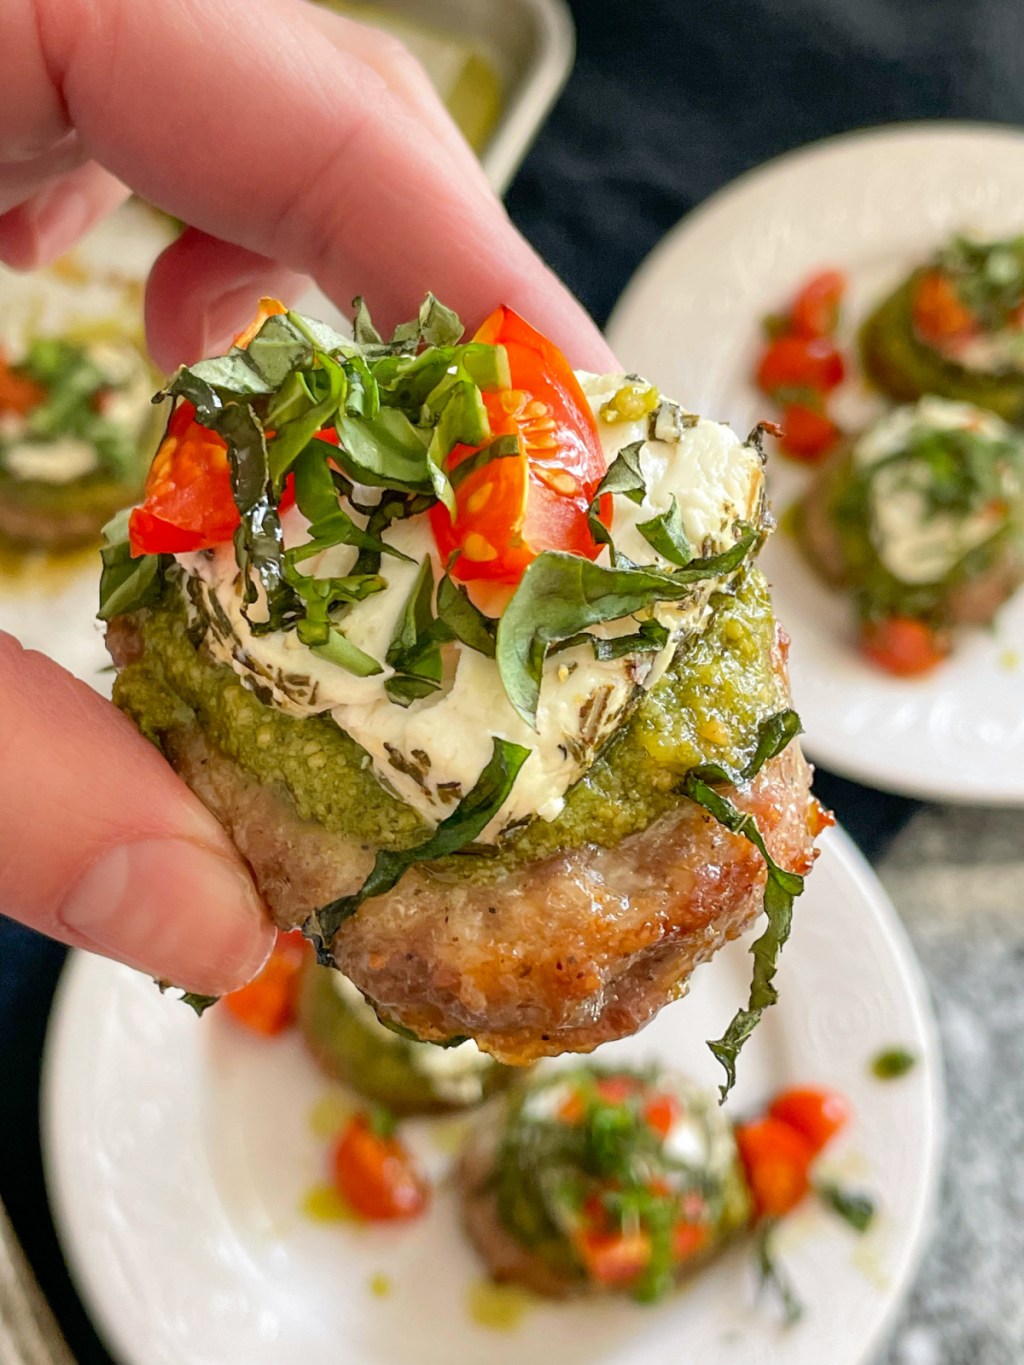 holding sausage bites with pesto, goat cheese, tomatoes